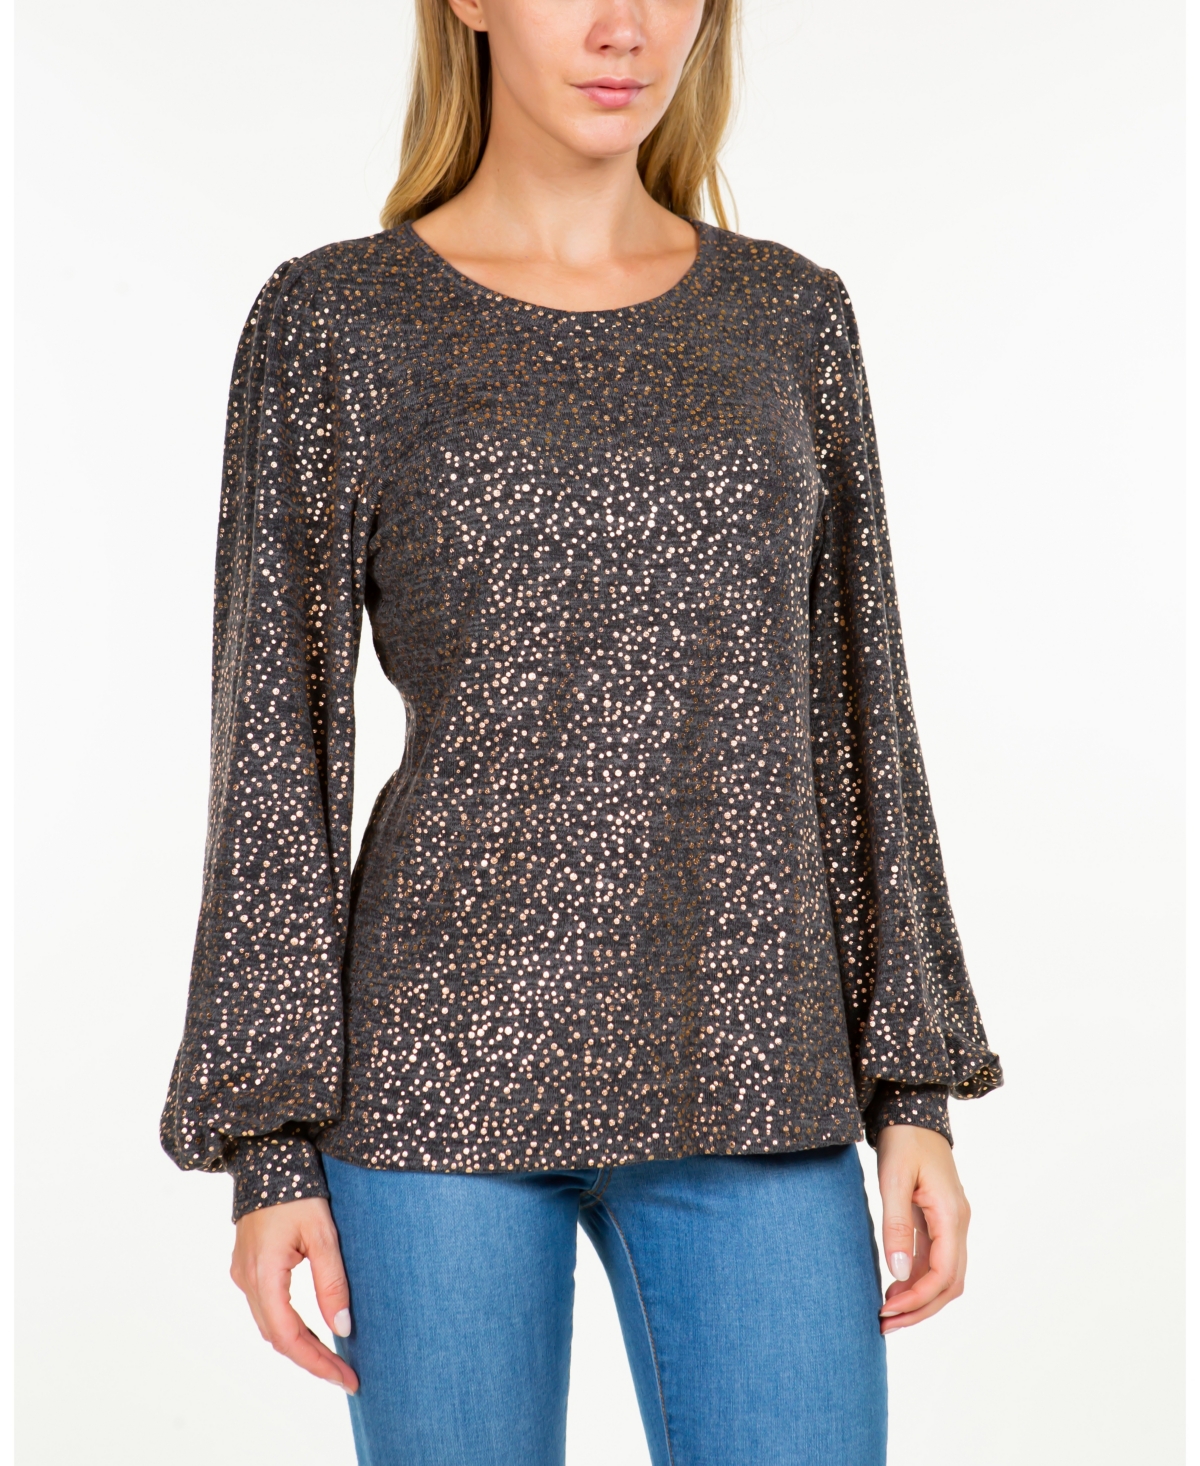 John Paul Richard Women's Soft Knit Top With Foil Printing In Charcoal Gray